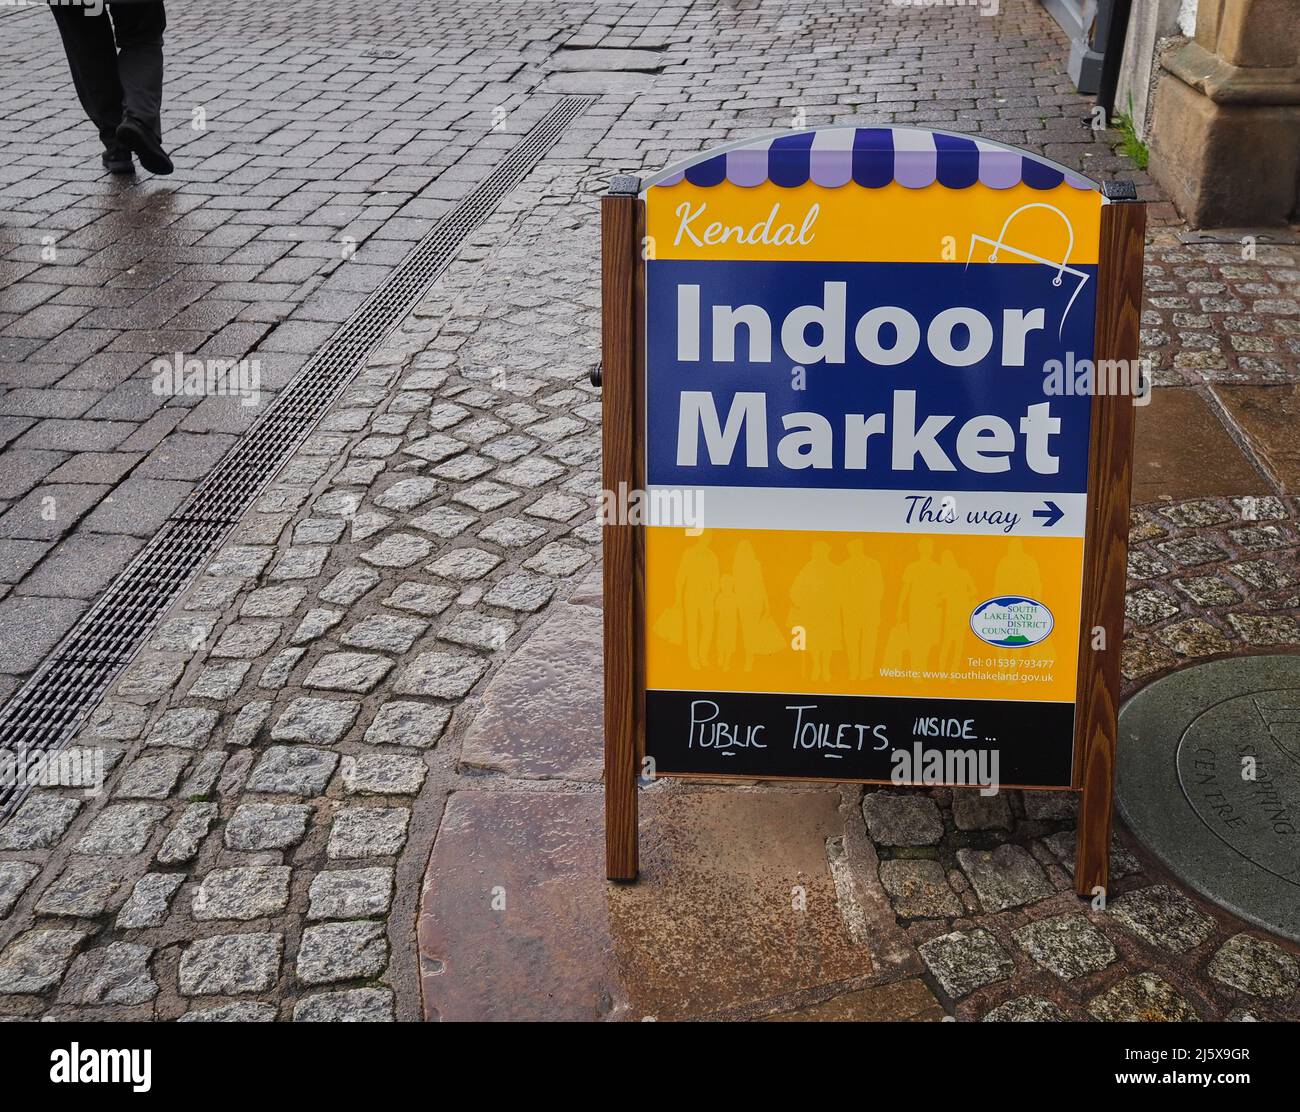 Sign pointing the way to Kendal's indoor market with a persons leg in view just having shopped there Stock Photo